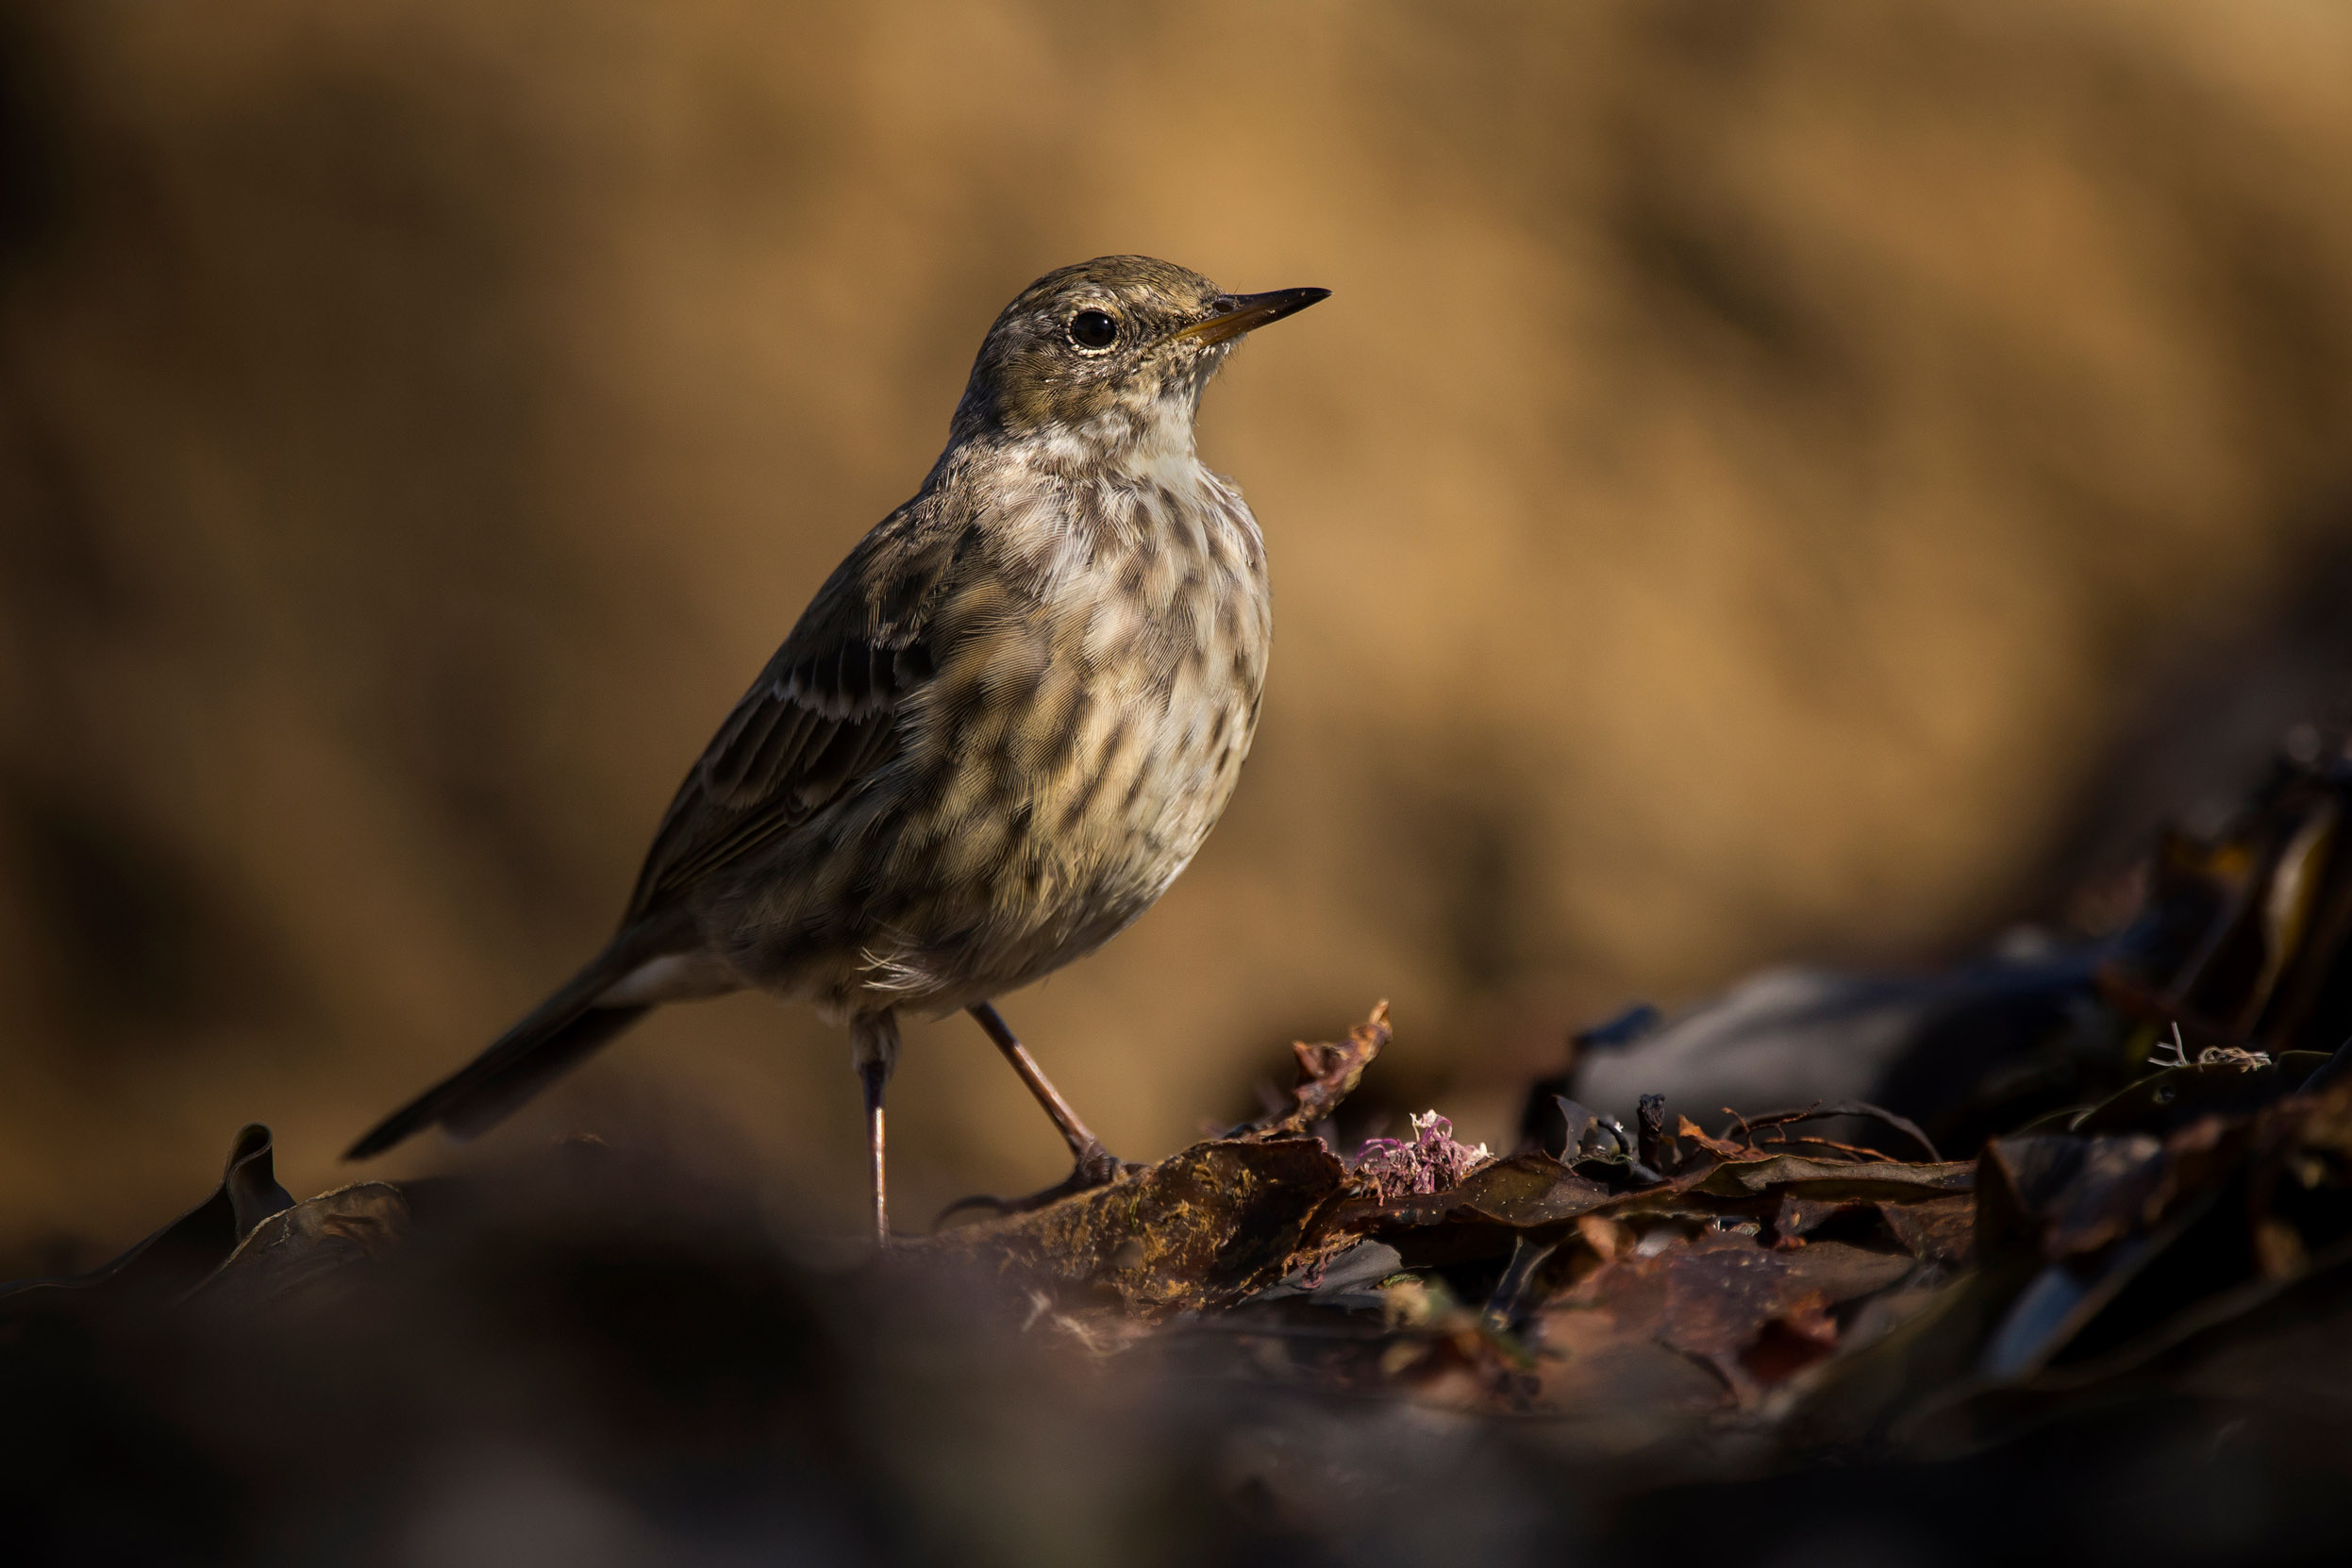 A lone Rock Pipit stood on a bed of fallen leaves.